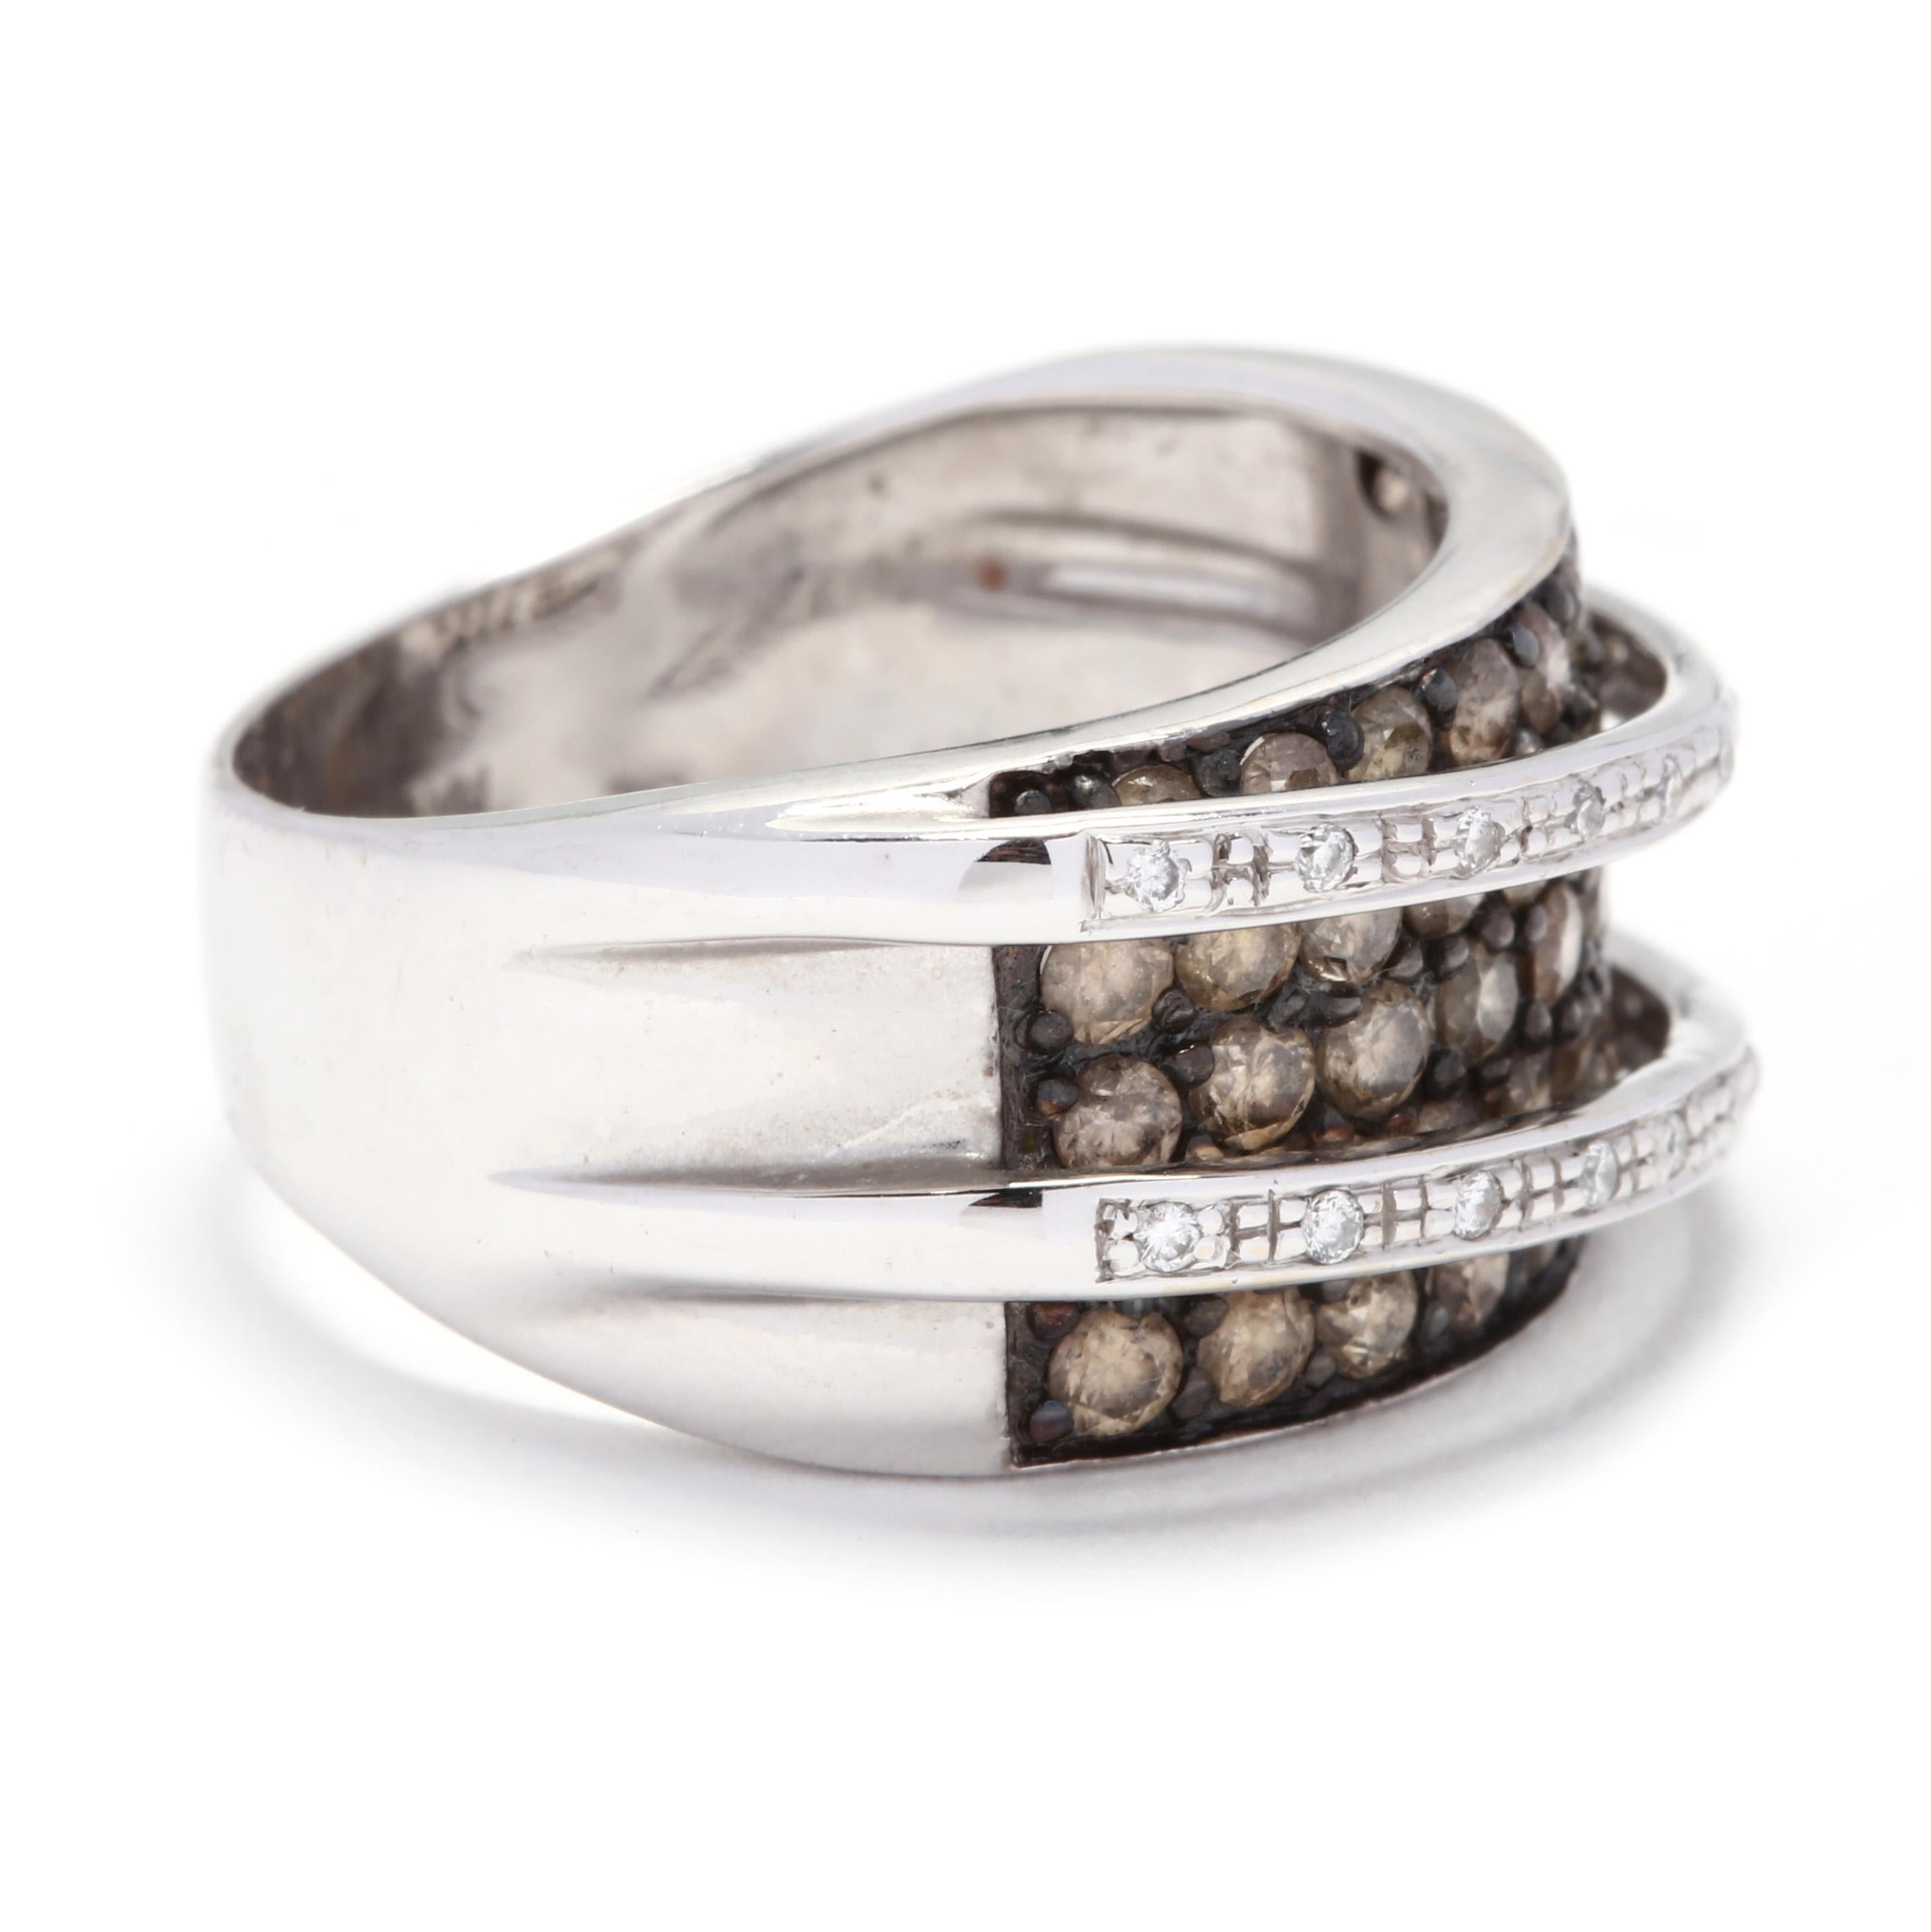 An 18 karat white gold, chocolate and colorless diamond crossover band ring by LeVian. This ring features five rows of full cut round chocolate diamonds pavé set with a blackened surround with two diagonal rows of colorless full cut round diamonds